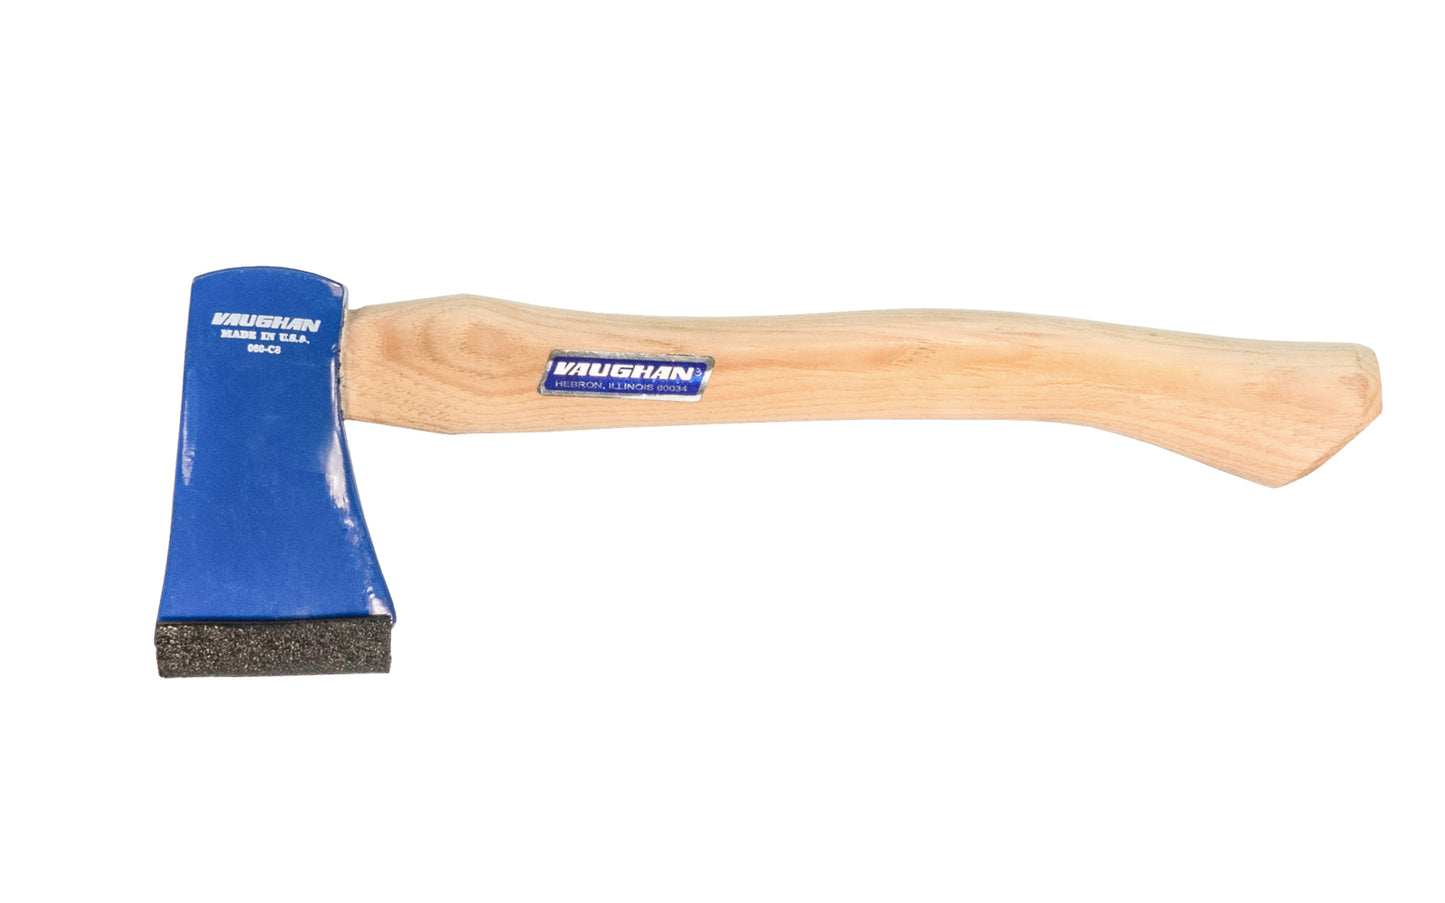 Vaughan's Mini Sportsman Hatchet is lightweight & easy to carry. Model ZS-1/2. 8 oz / 1/2 lb. small hatchet axe. Great for a small backpack, small tool box or tackle box, The head is ground smooth, with a rust-resistant blue finish. Hickory handle. 11-1/4" overall length & 2-1/4" cutting edge. 051218333015. Made in USA